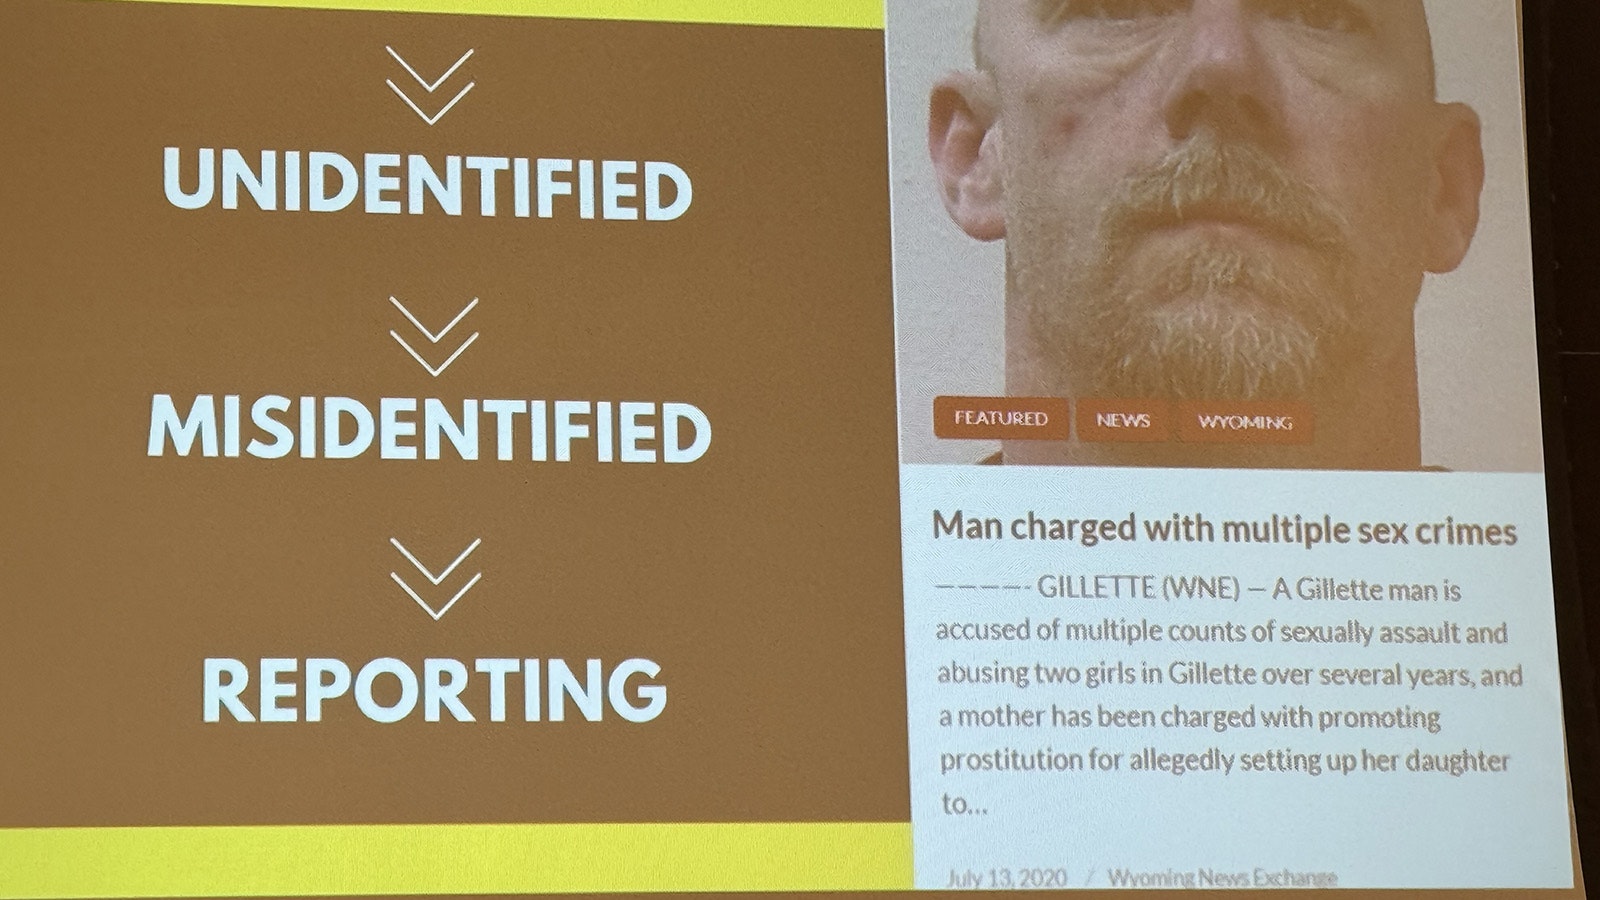 A slide during Uprising's presentation detailing the reasons why human trafficking can slip through the cracks of law enforcement: cases are often unidentified, often misidentified, and many go unreported. John Byron Mills, the Gillette man in the picture, is serving a 71- to 85-year prison sentence for sexual abuse of two minor girls.